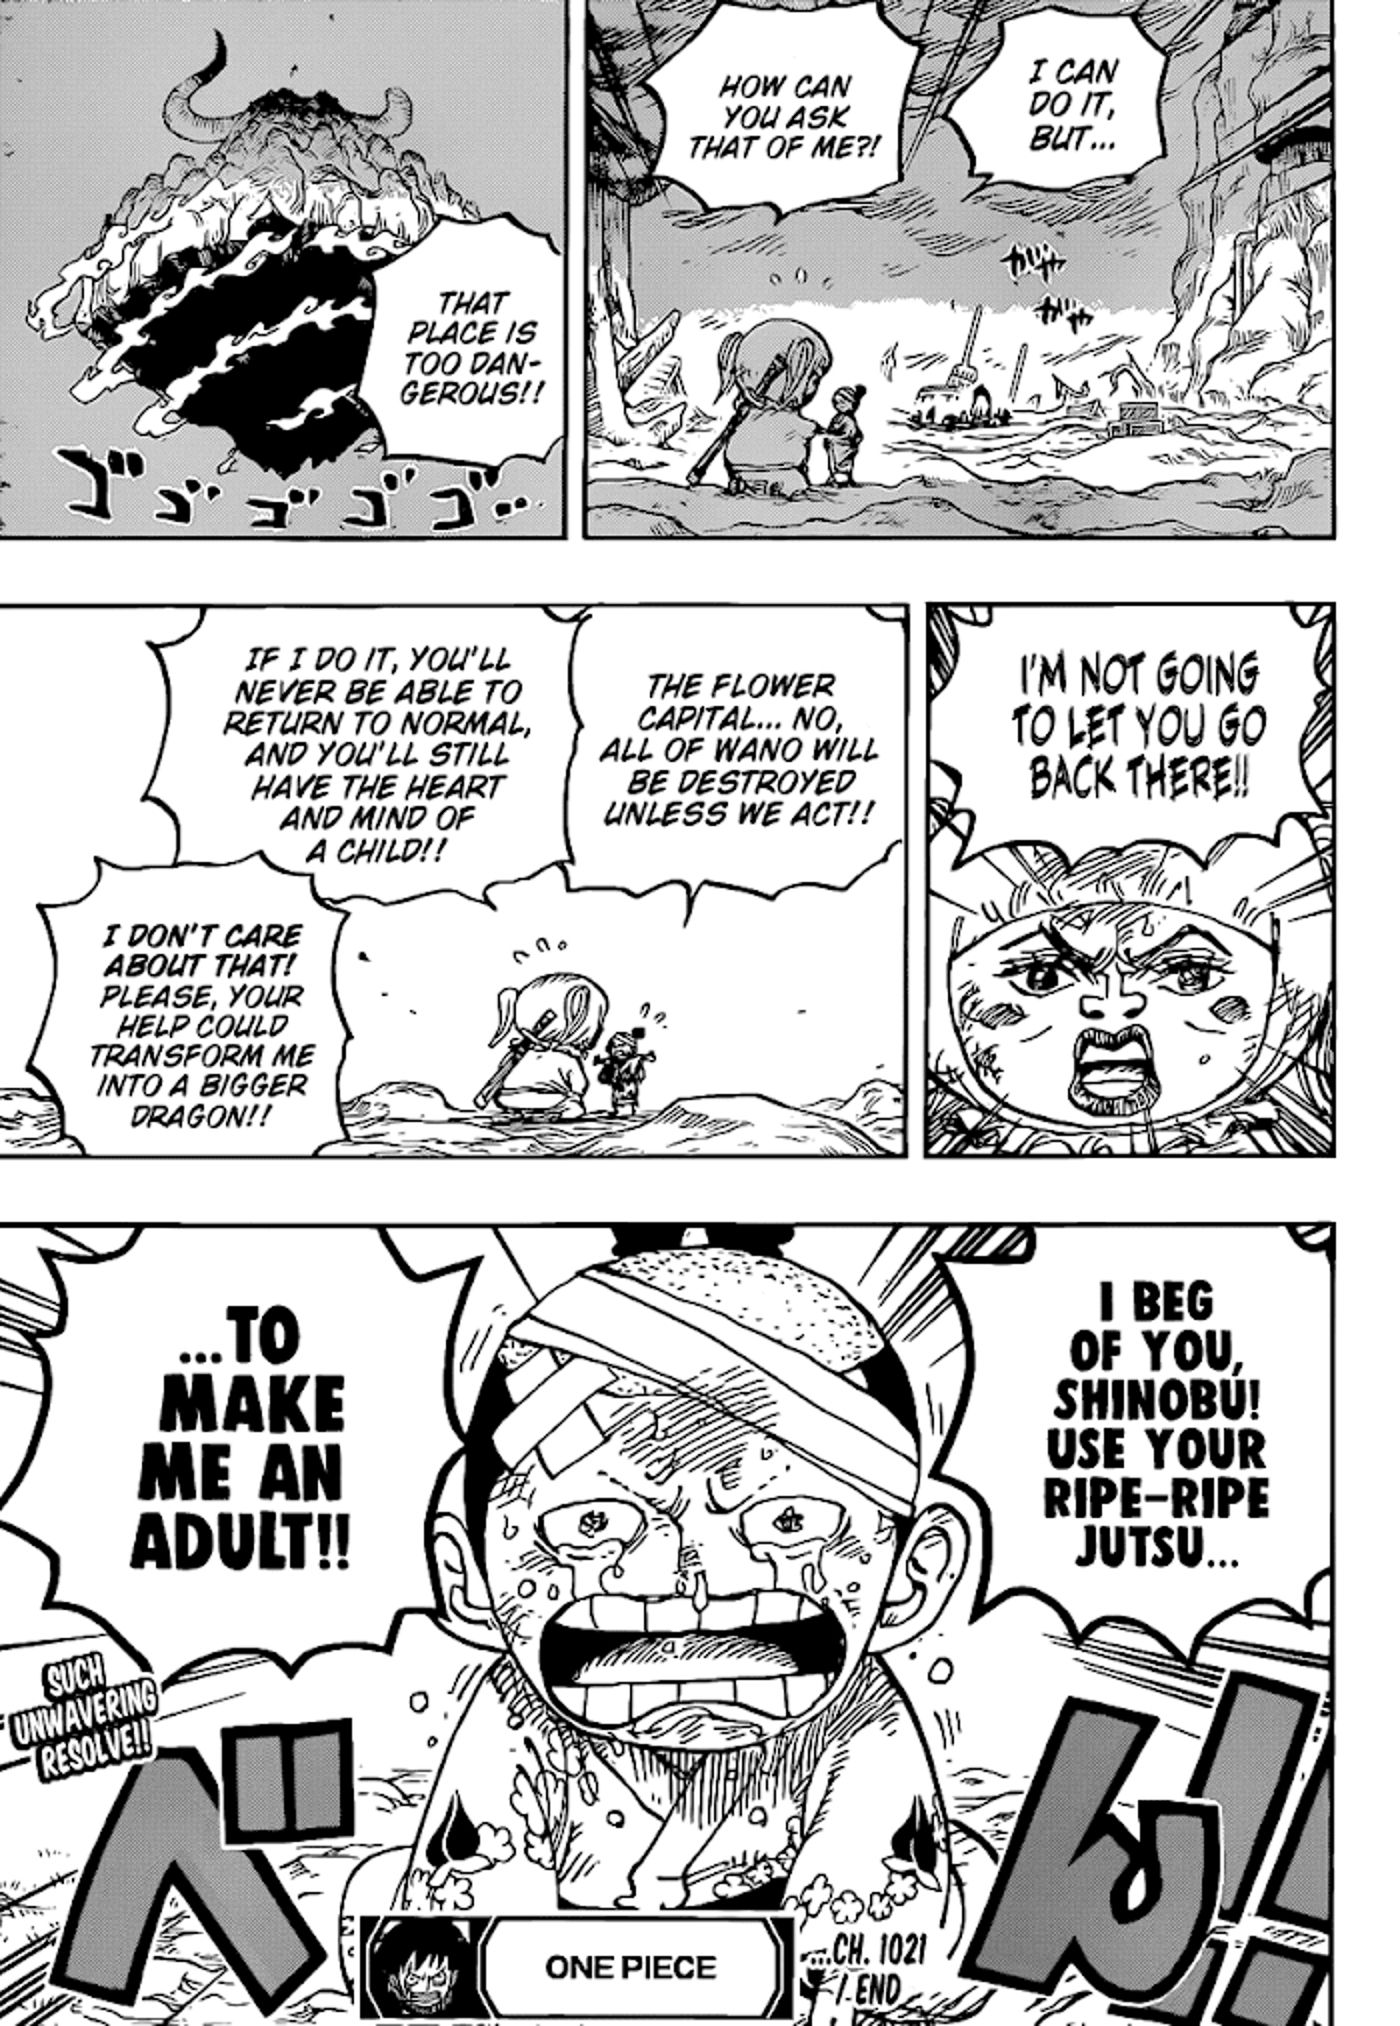 An Underrated One Piece Devil Fruit Could Have Beaten Kaido Years Ago